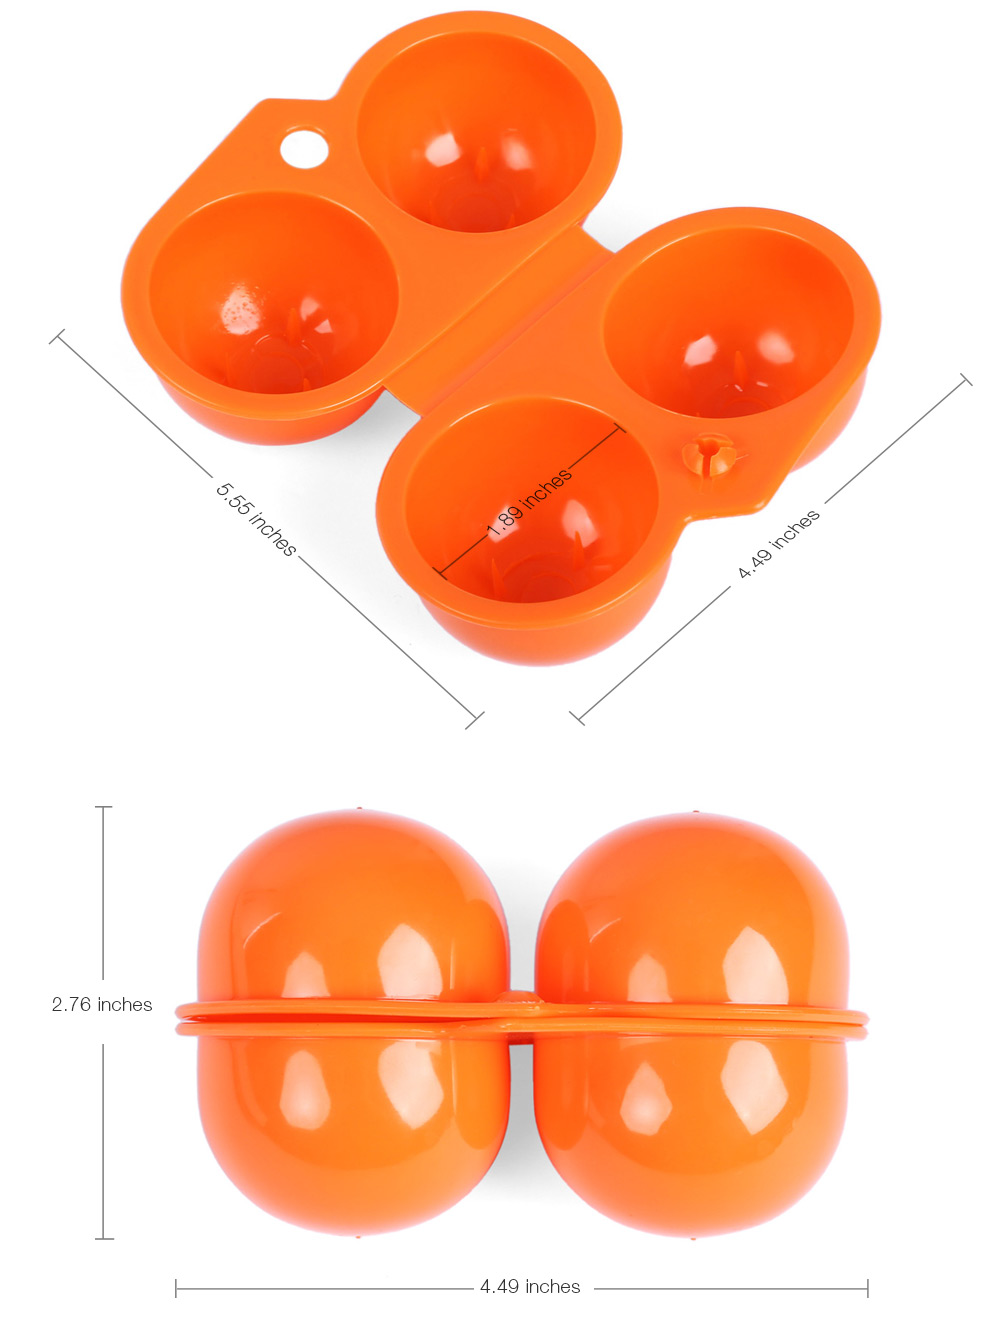 AOTU Harmless Egg Storage Box Container Case Carrier Outdoor Kit